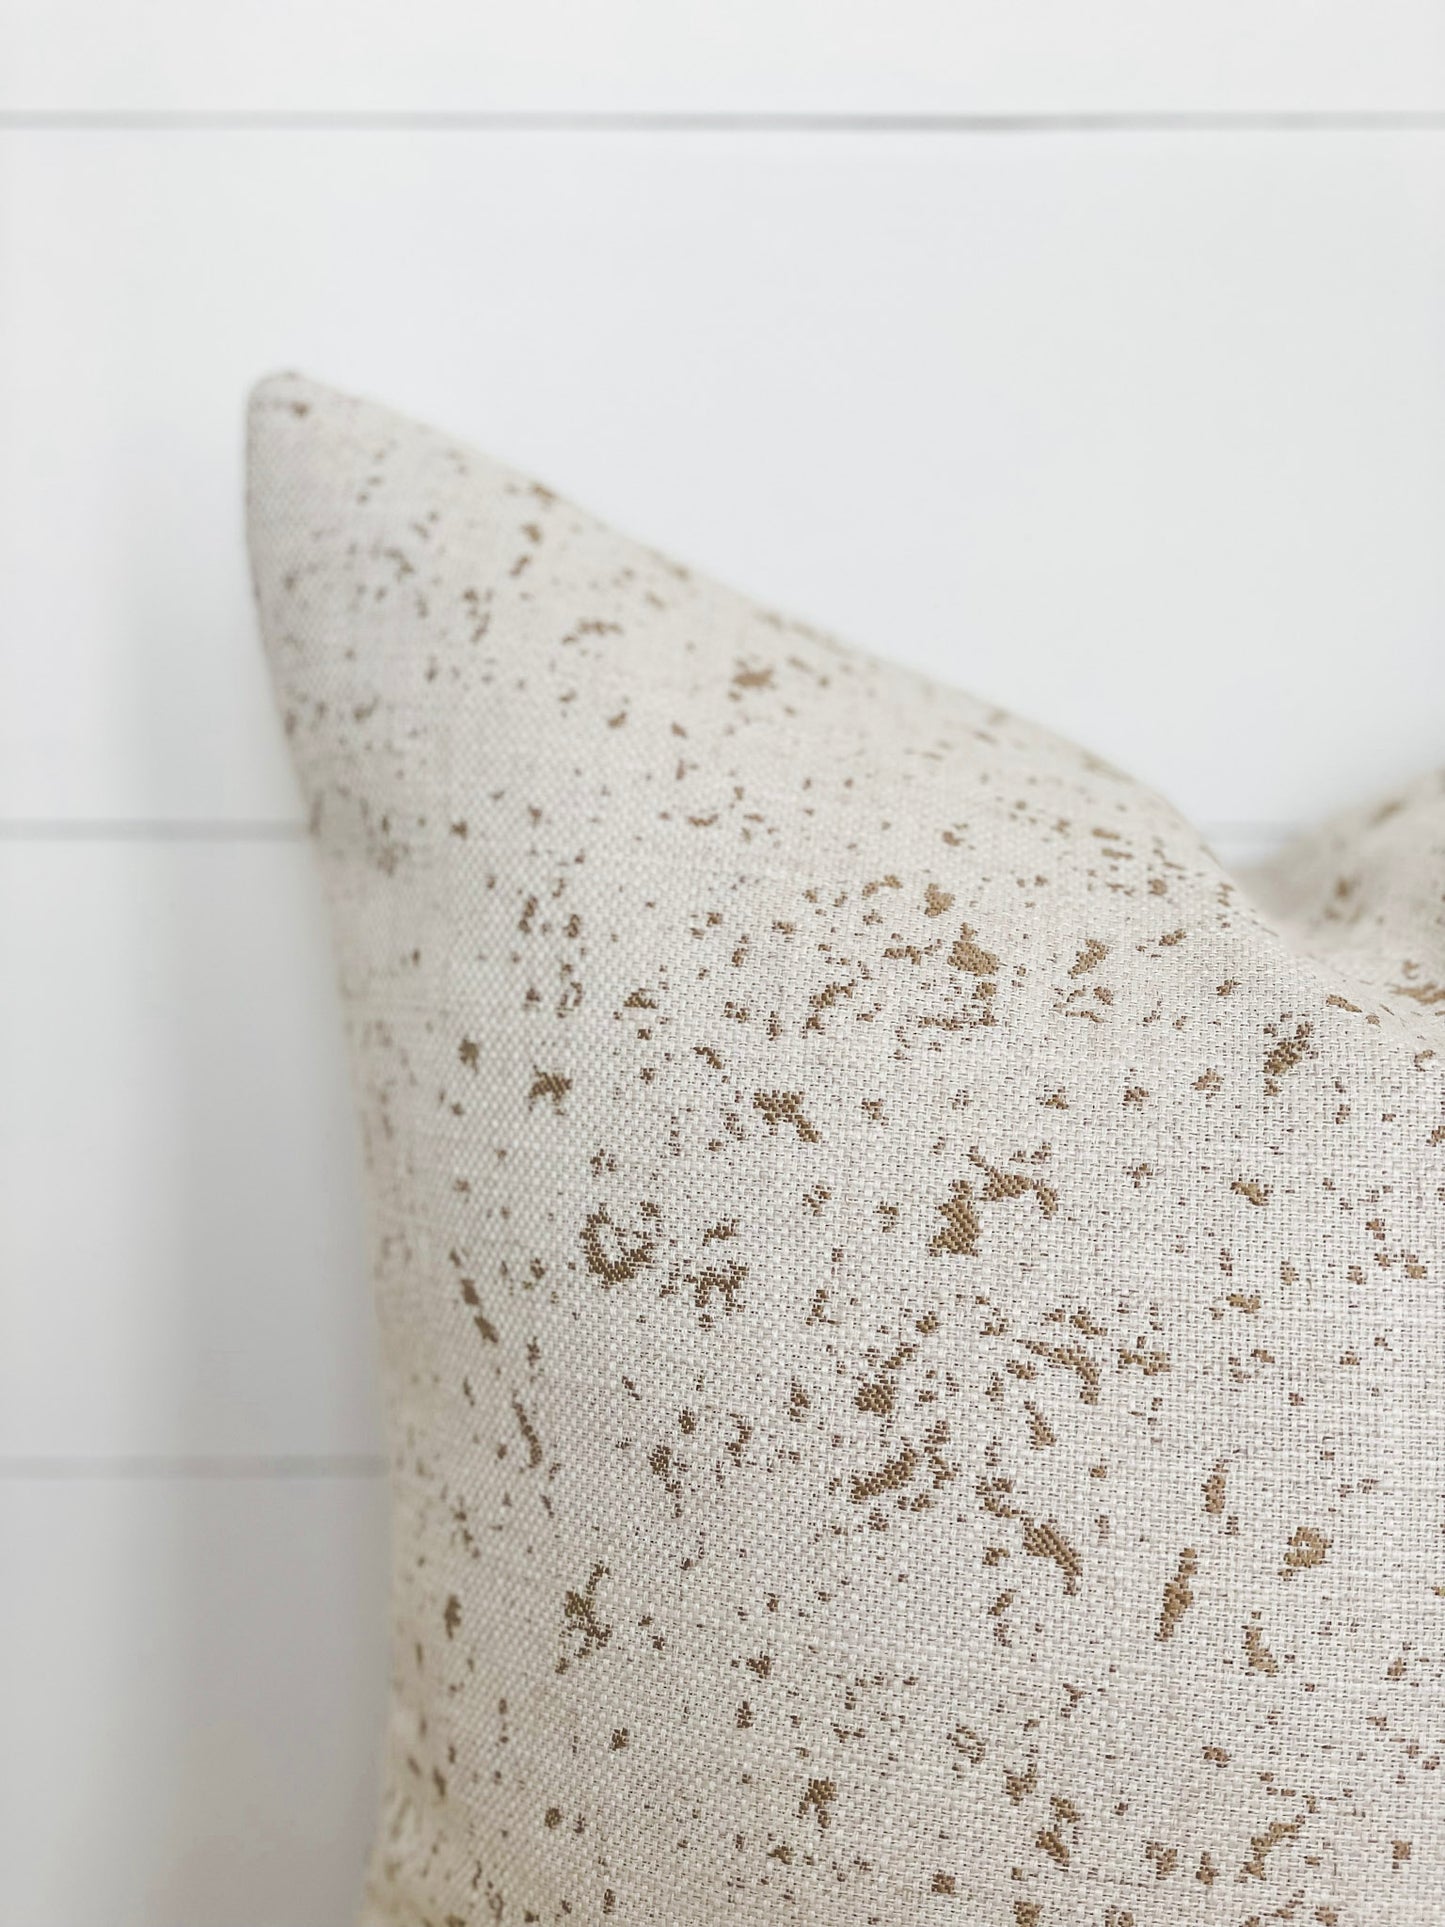 Cushion Cover - Brass Speckle